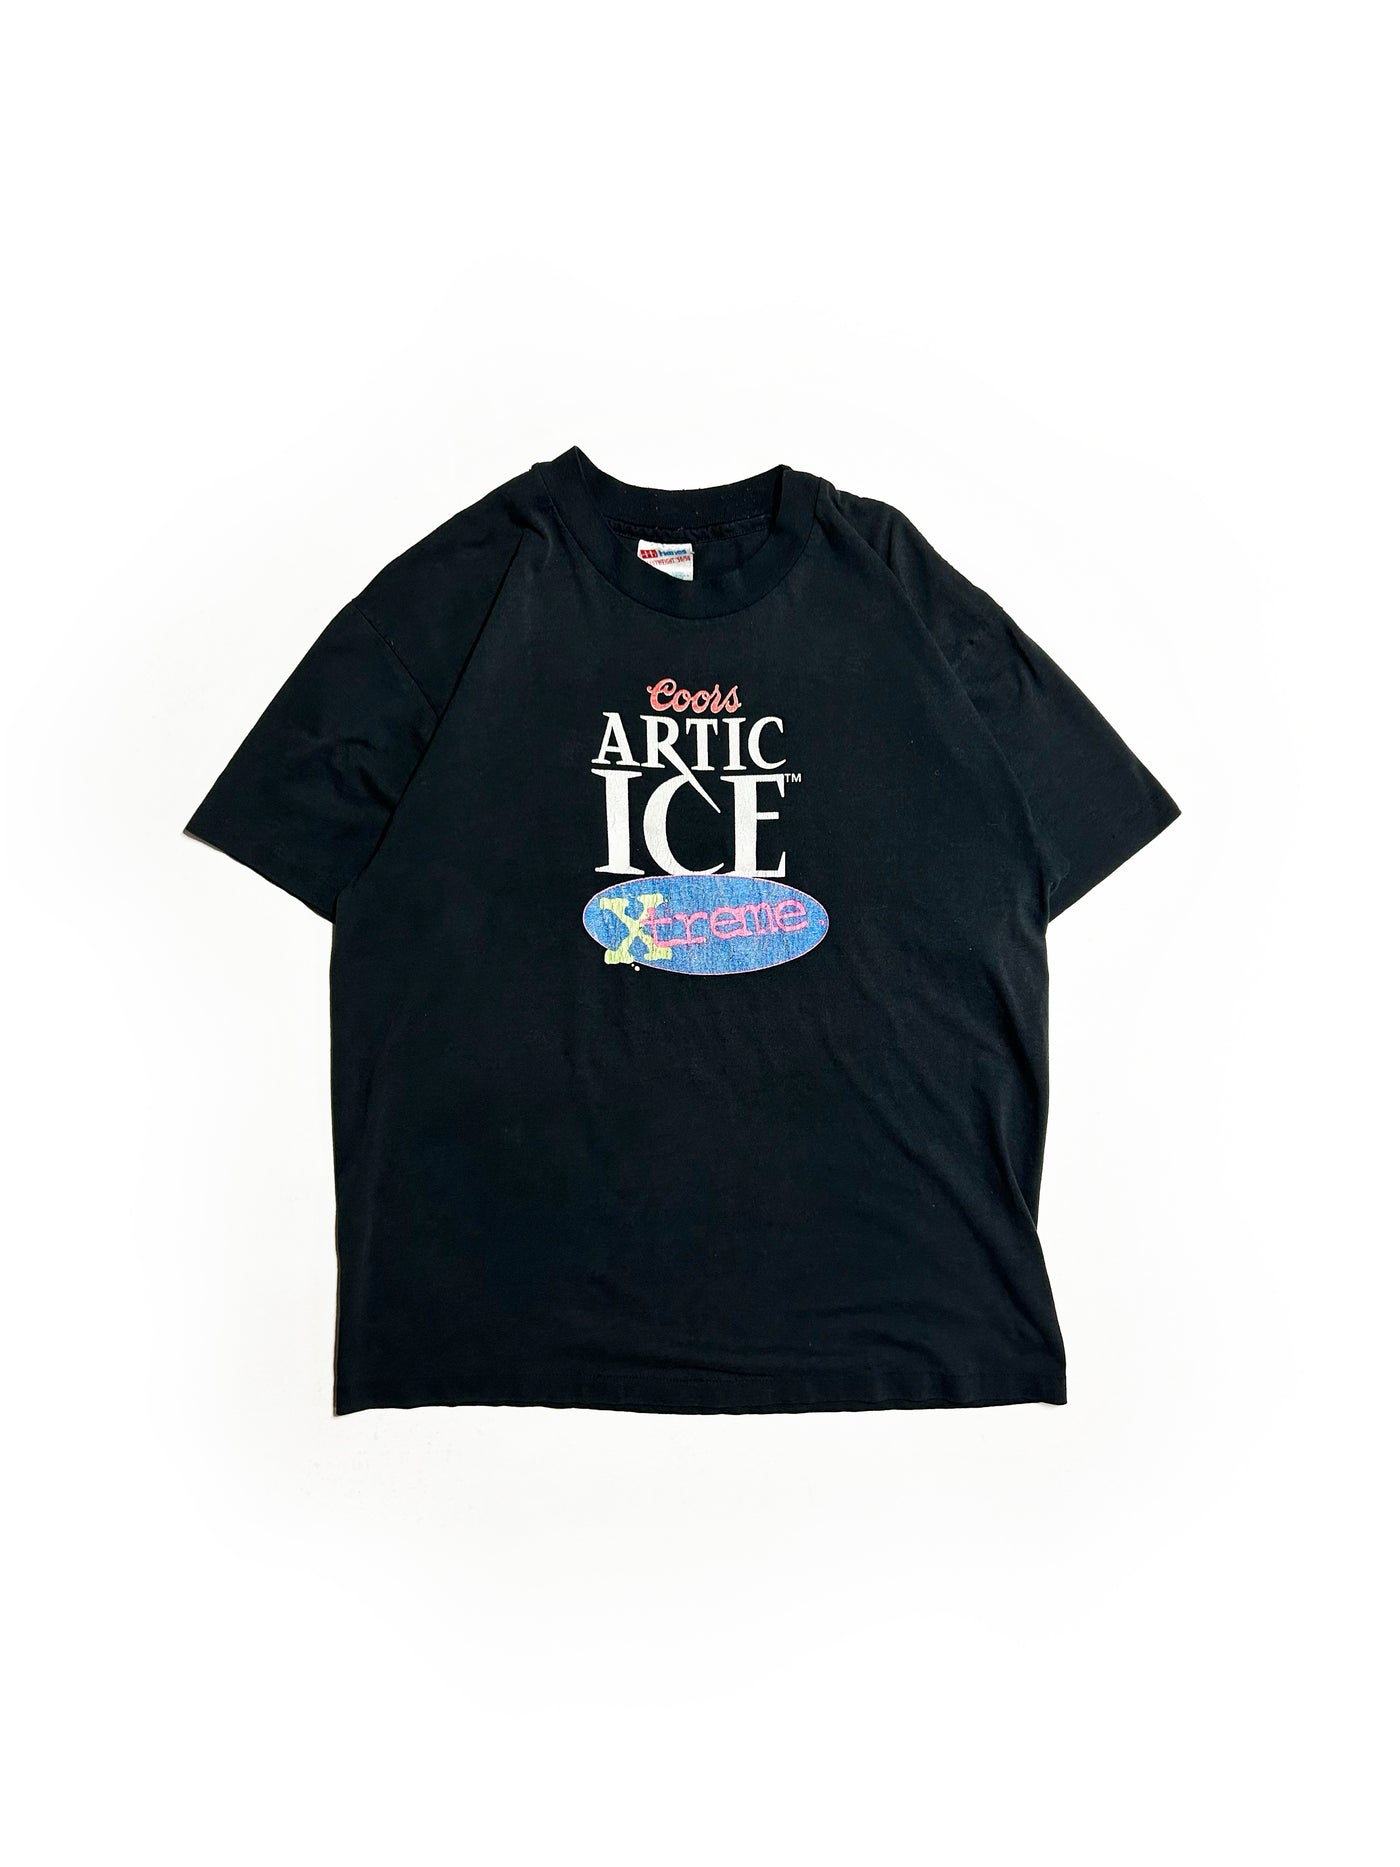 Vintage 90s Coors Artic Ice T-Shirt